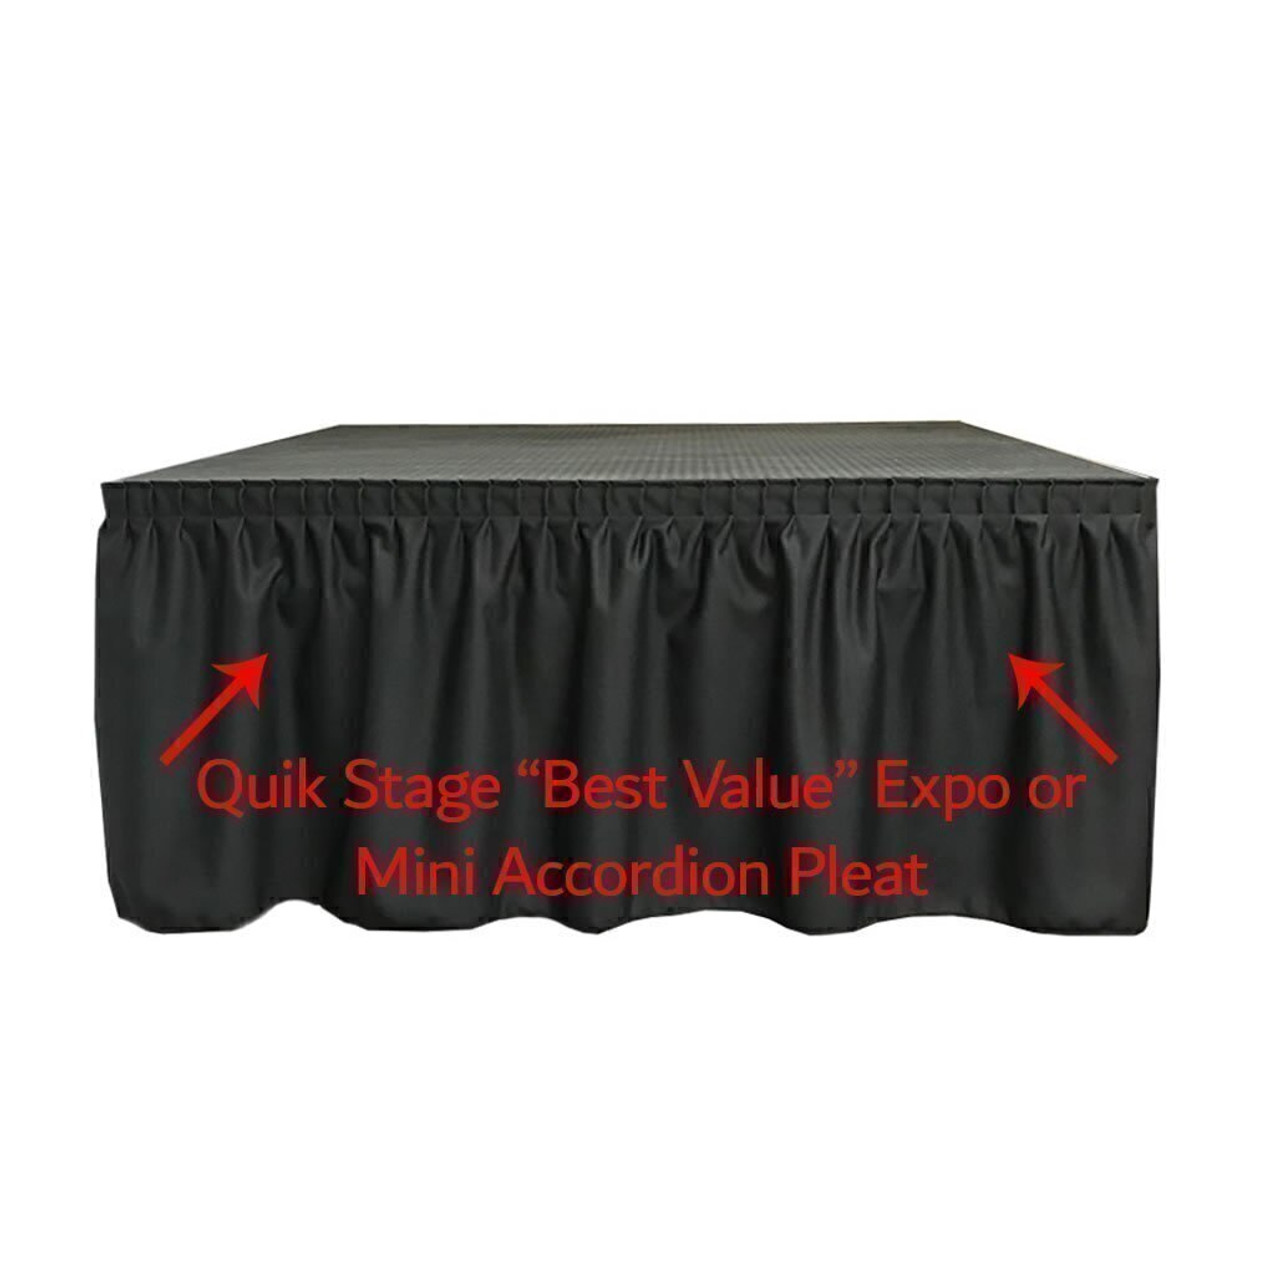 High Quality Quik Stage 12' x 32' High Portable Stage Package with Black Polyvinyl Non-Skid Surface. Additional Heights and Surfaces Available. - Best Value Expo Pleat Stage Skirting.